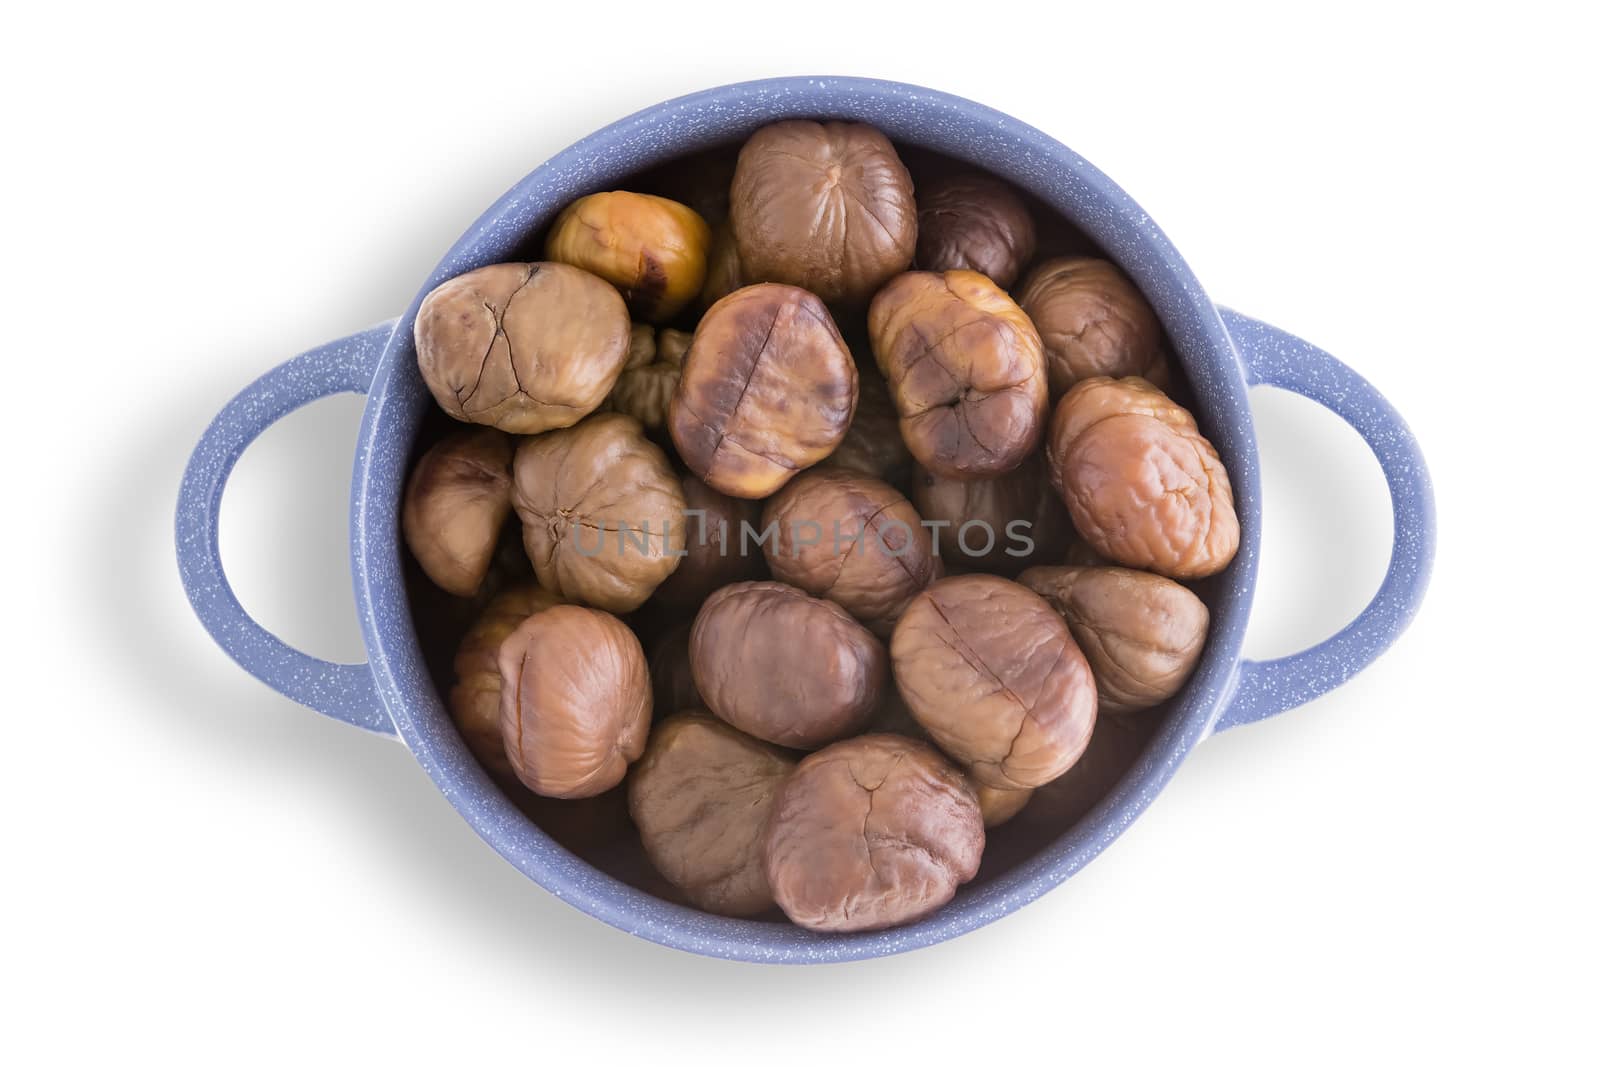 Blue earthenware bowl full of fresh roasted chestnuts harvested during autumn and fall for a tasty healthy seasonal snack viewed from overhead on a white background